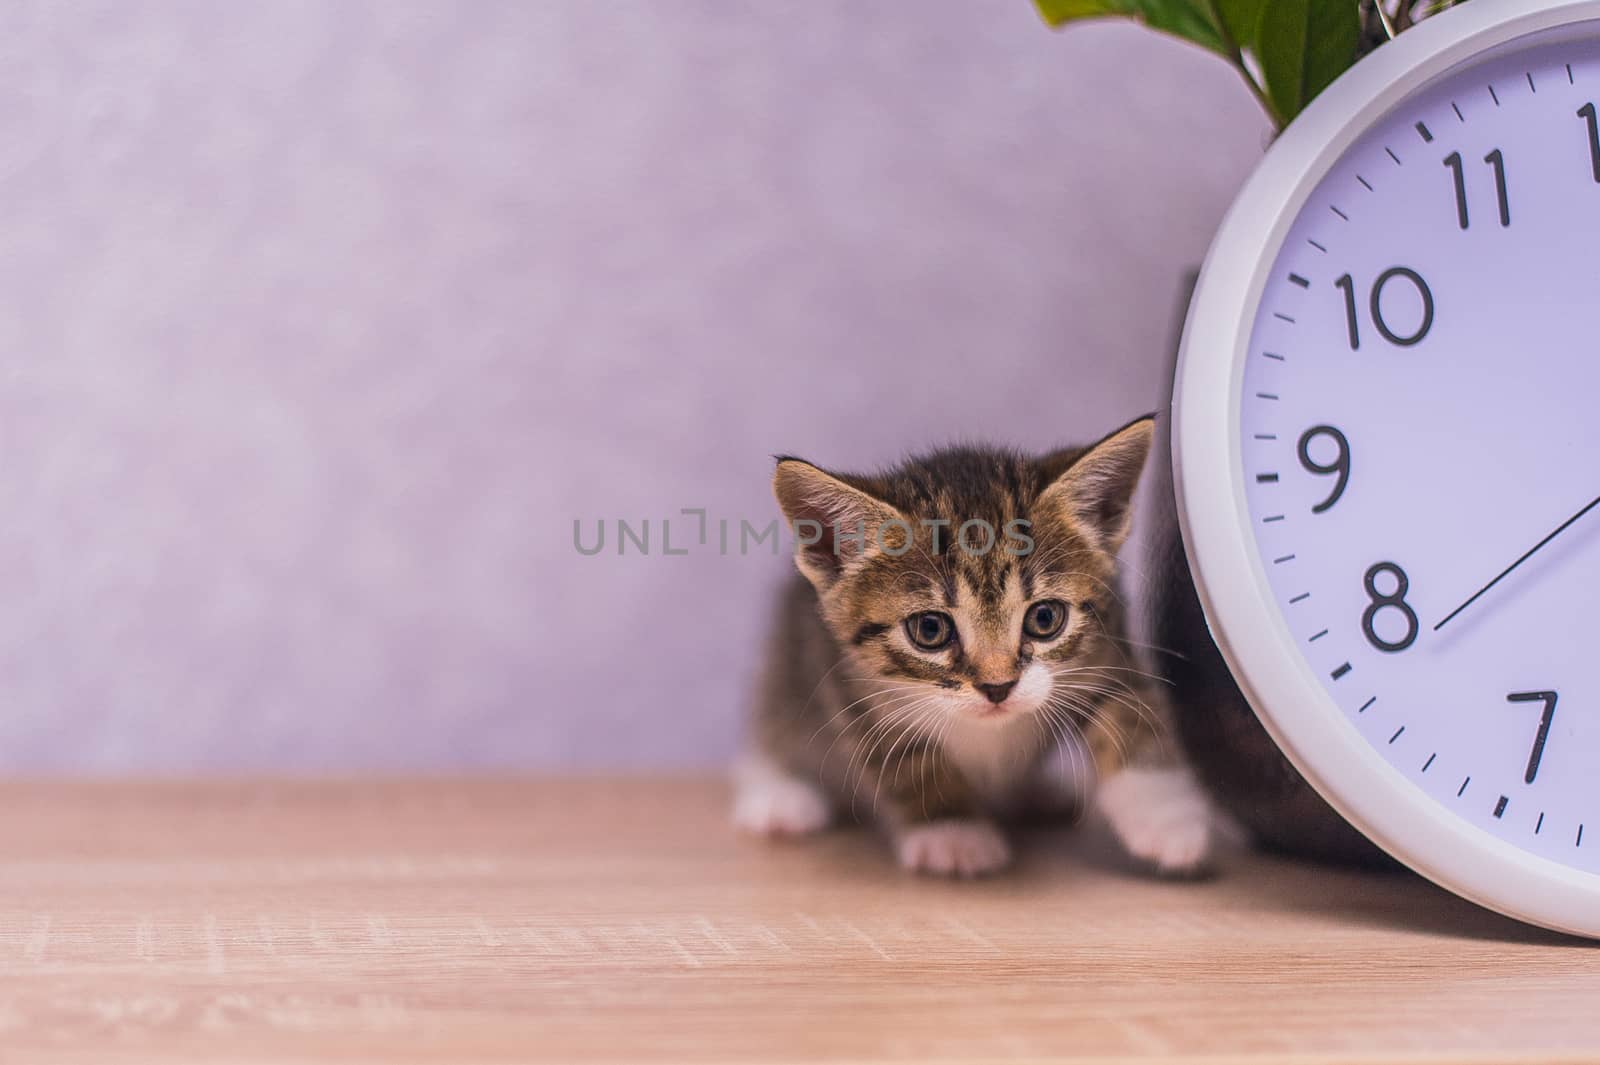 striped kitten sits near a clock on a wooden table by chernobrovin